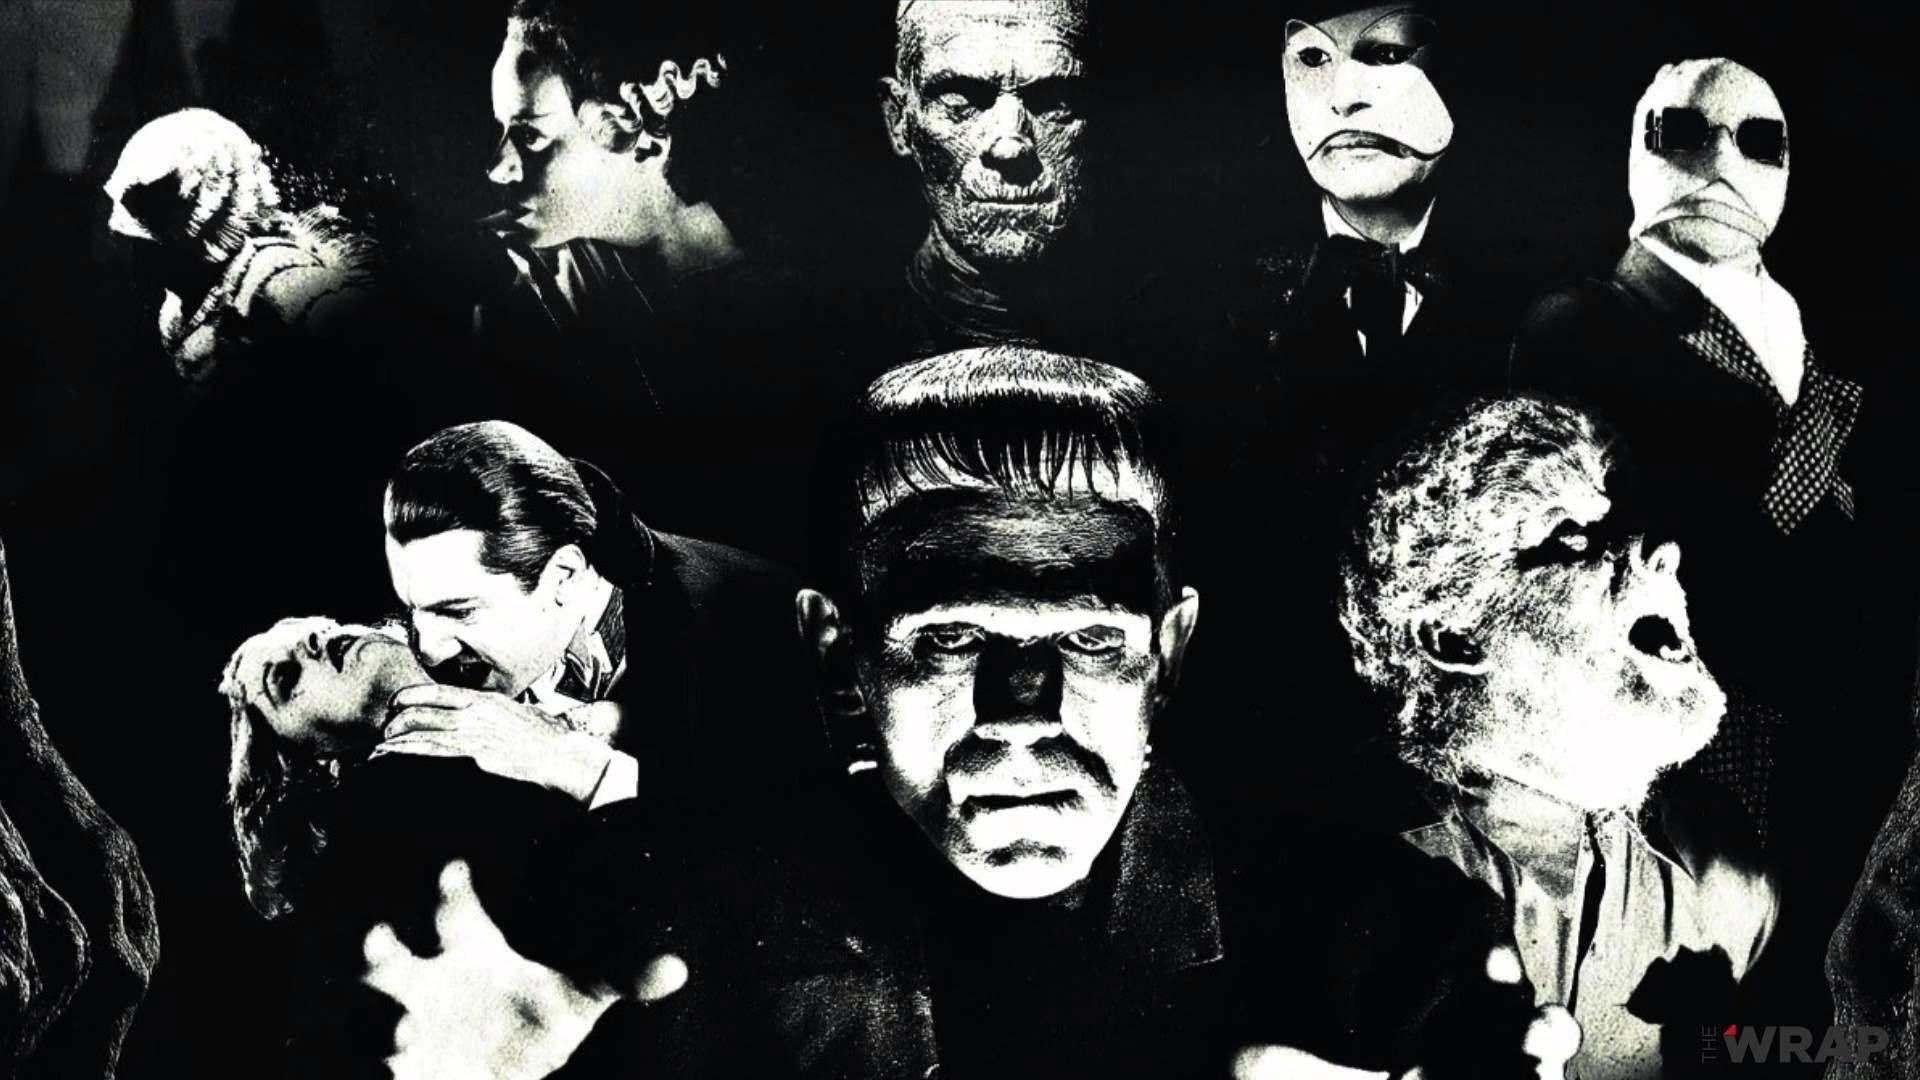 Universal Monsters 1920X1080 Wallpapers - Top Free Universal Monsters